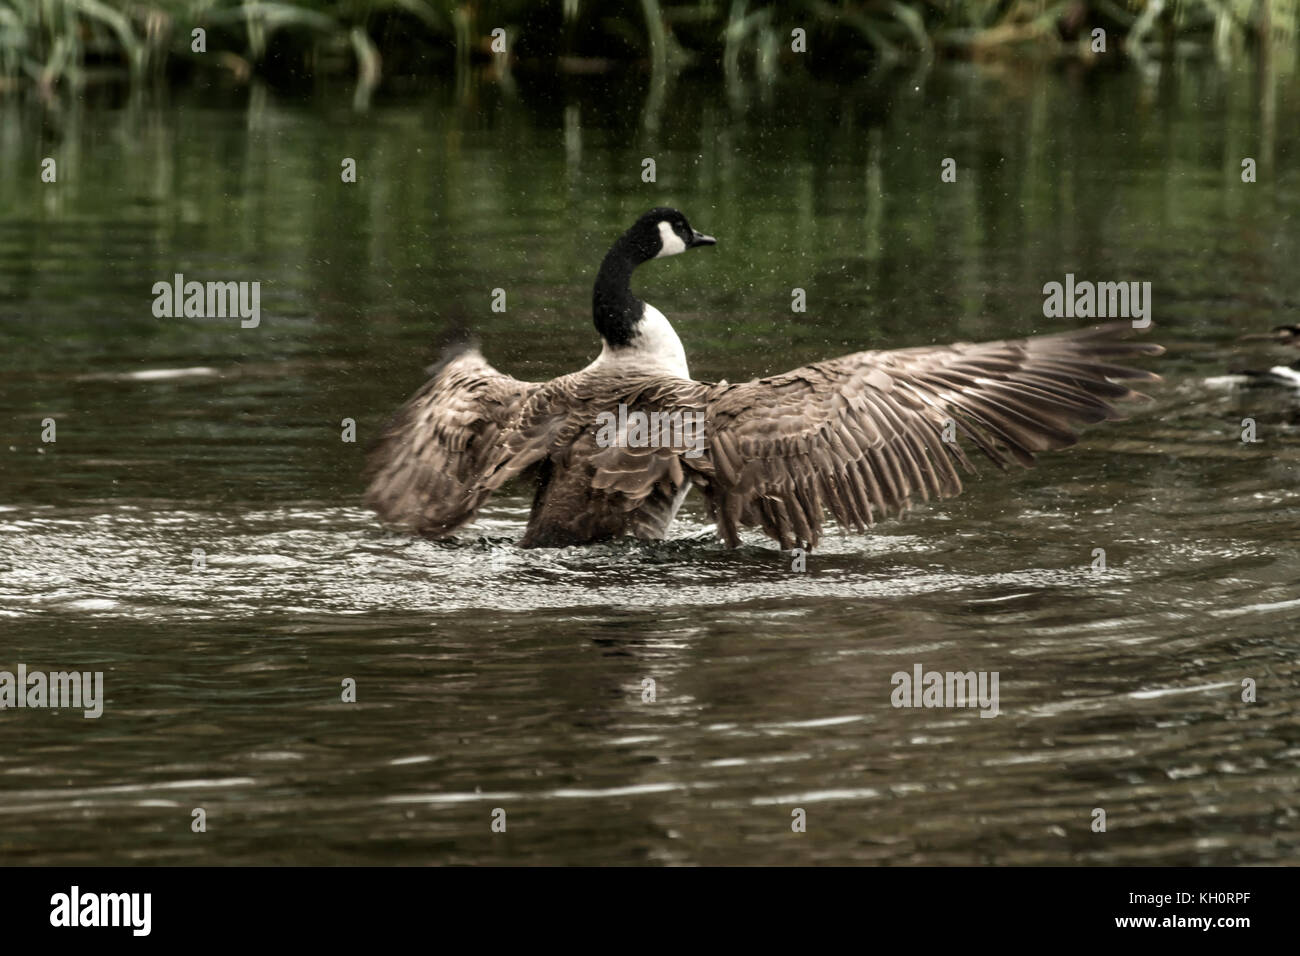 River Nene, Peterborough. 11th Nov, 2017. UK Weather. Canada Gesse enjoy a warmer the normal autumn day basking on the river after their migration flight to their winter ground's along the river Nene. Clifford Norton/Alamy Live News Stock Photo